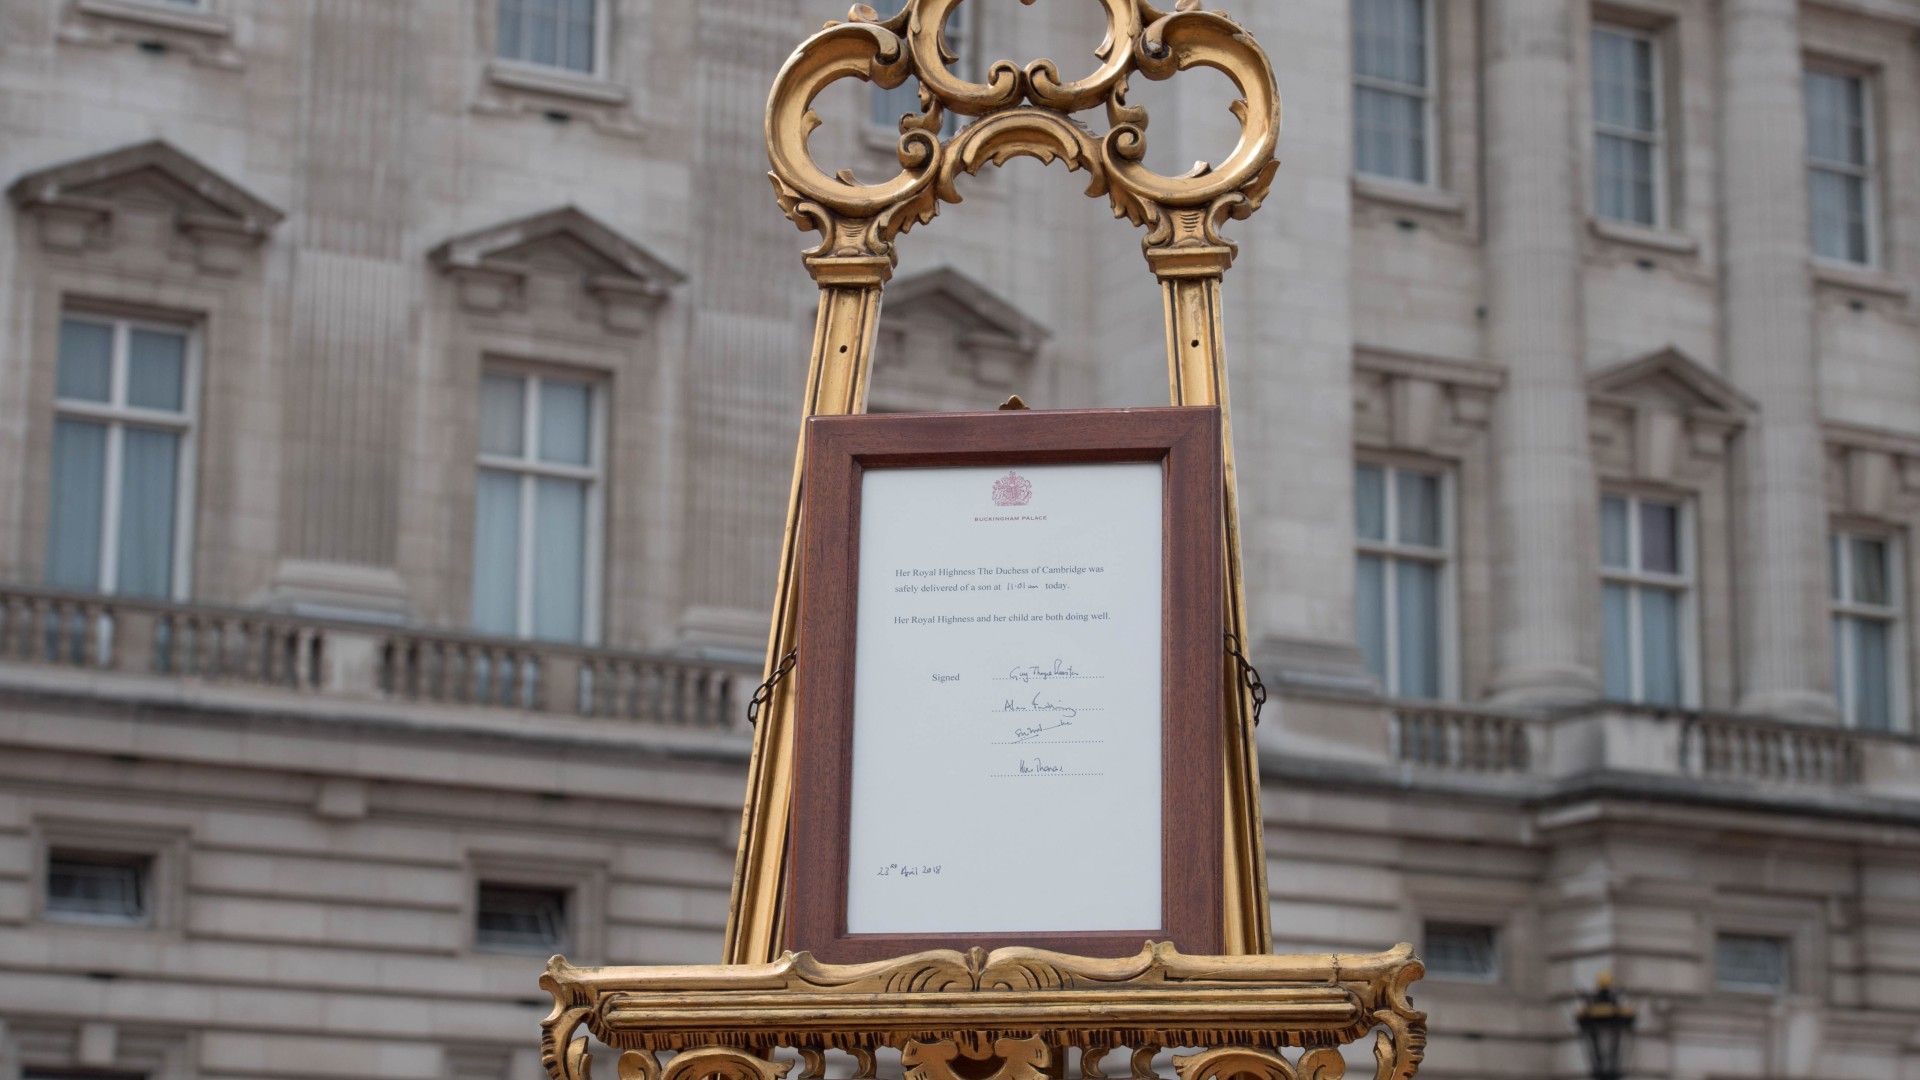 <p>                     In the current digital age, royal births are usually first announced via social media, in order for the royal family to break the news first. However, the tradition of mounting an easel with the details of the birth outside of Buckingham Palace is still very much alive!                   </p>                                      <p>                     This tradition first began decades ago, when the easel was the only way for the royals to make a public announcement. Typically placed outside of the palace by a member of the Royal Household, the easel is now more a tradition than an<em> actual </em>announcement – but it still includes all the details of a new baby’s birth, including the location, the newborn's name, and the baby’s weight.                    </p>